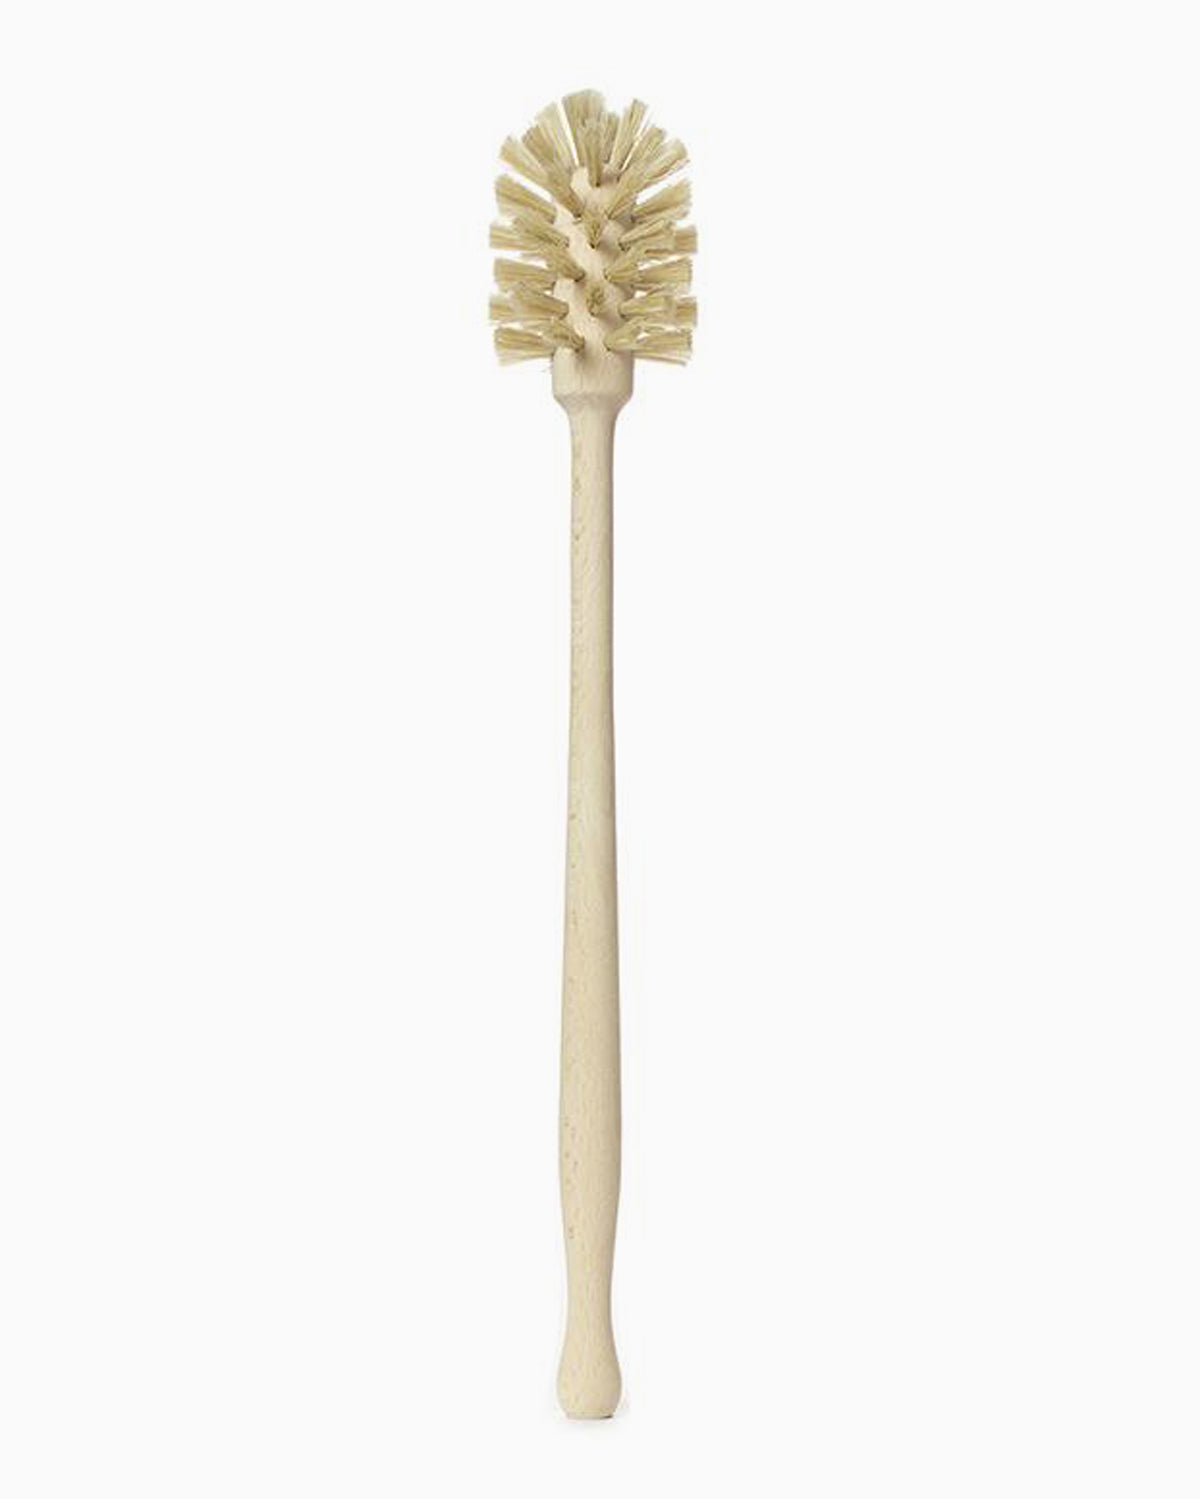 Fraido the feather duster (Yellow or White) - Expo Design Inc.